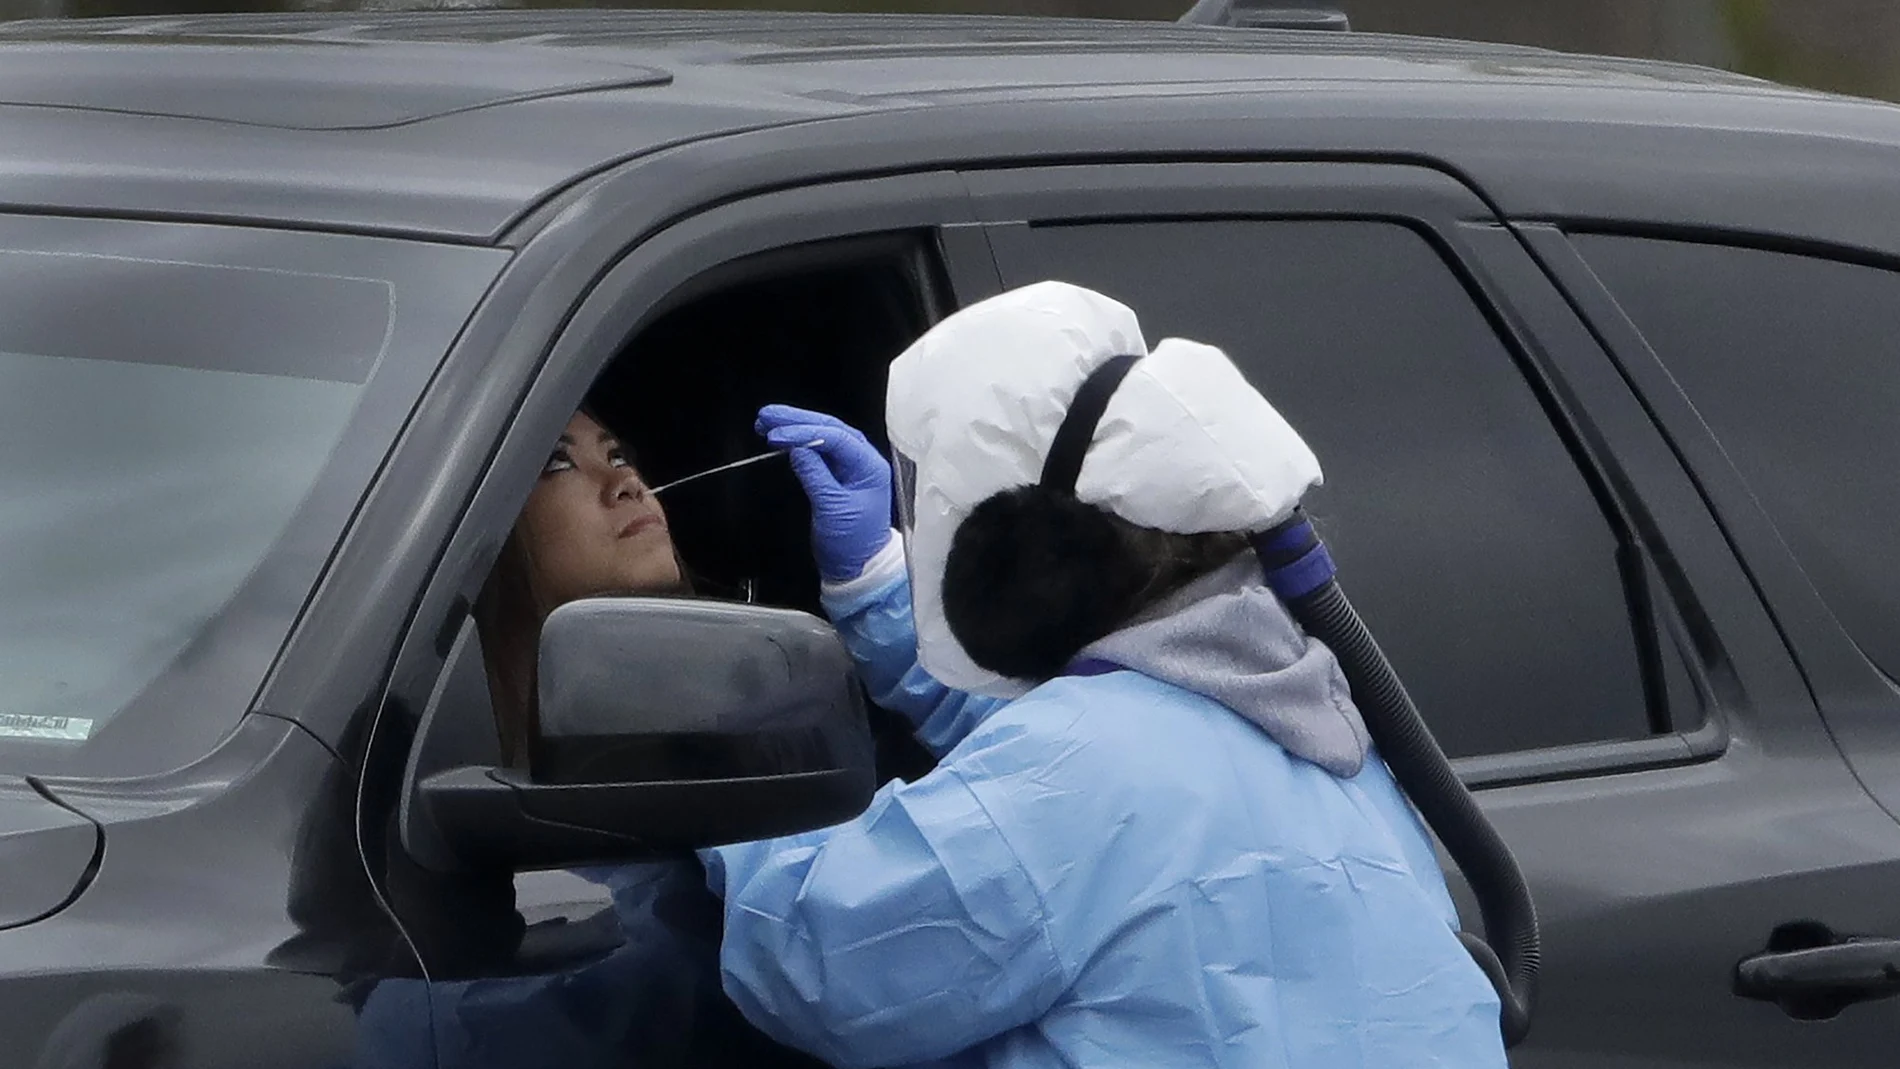 Healthcare workers from Johnson County Health & Environment test a woman for COVID-19 at a drive-in testing center Friday, April 17, 2020, in Shawnee, Kan. Kansas Democratic Gov. Laura Kelly, whose state has one of the lowest per capita testing rates in the country, told CNN it has been difficult to get testing supplies. (AP Photo/Charlie Riedel)